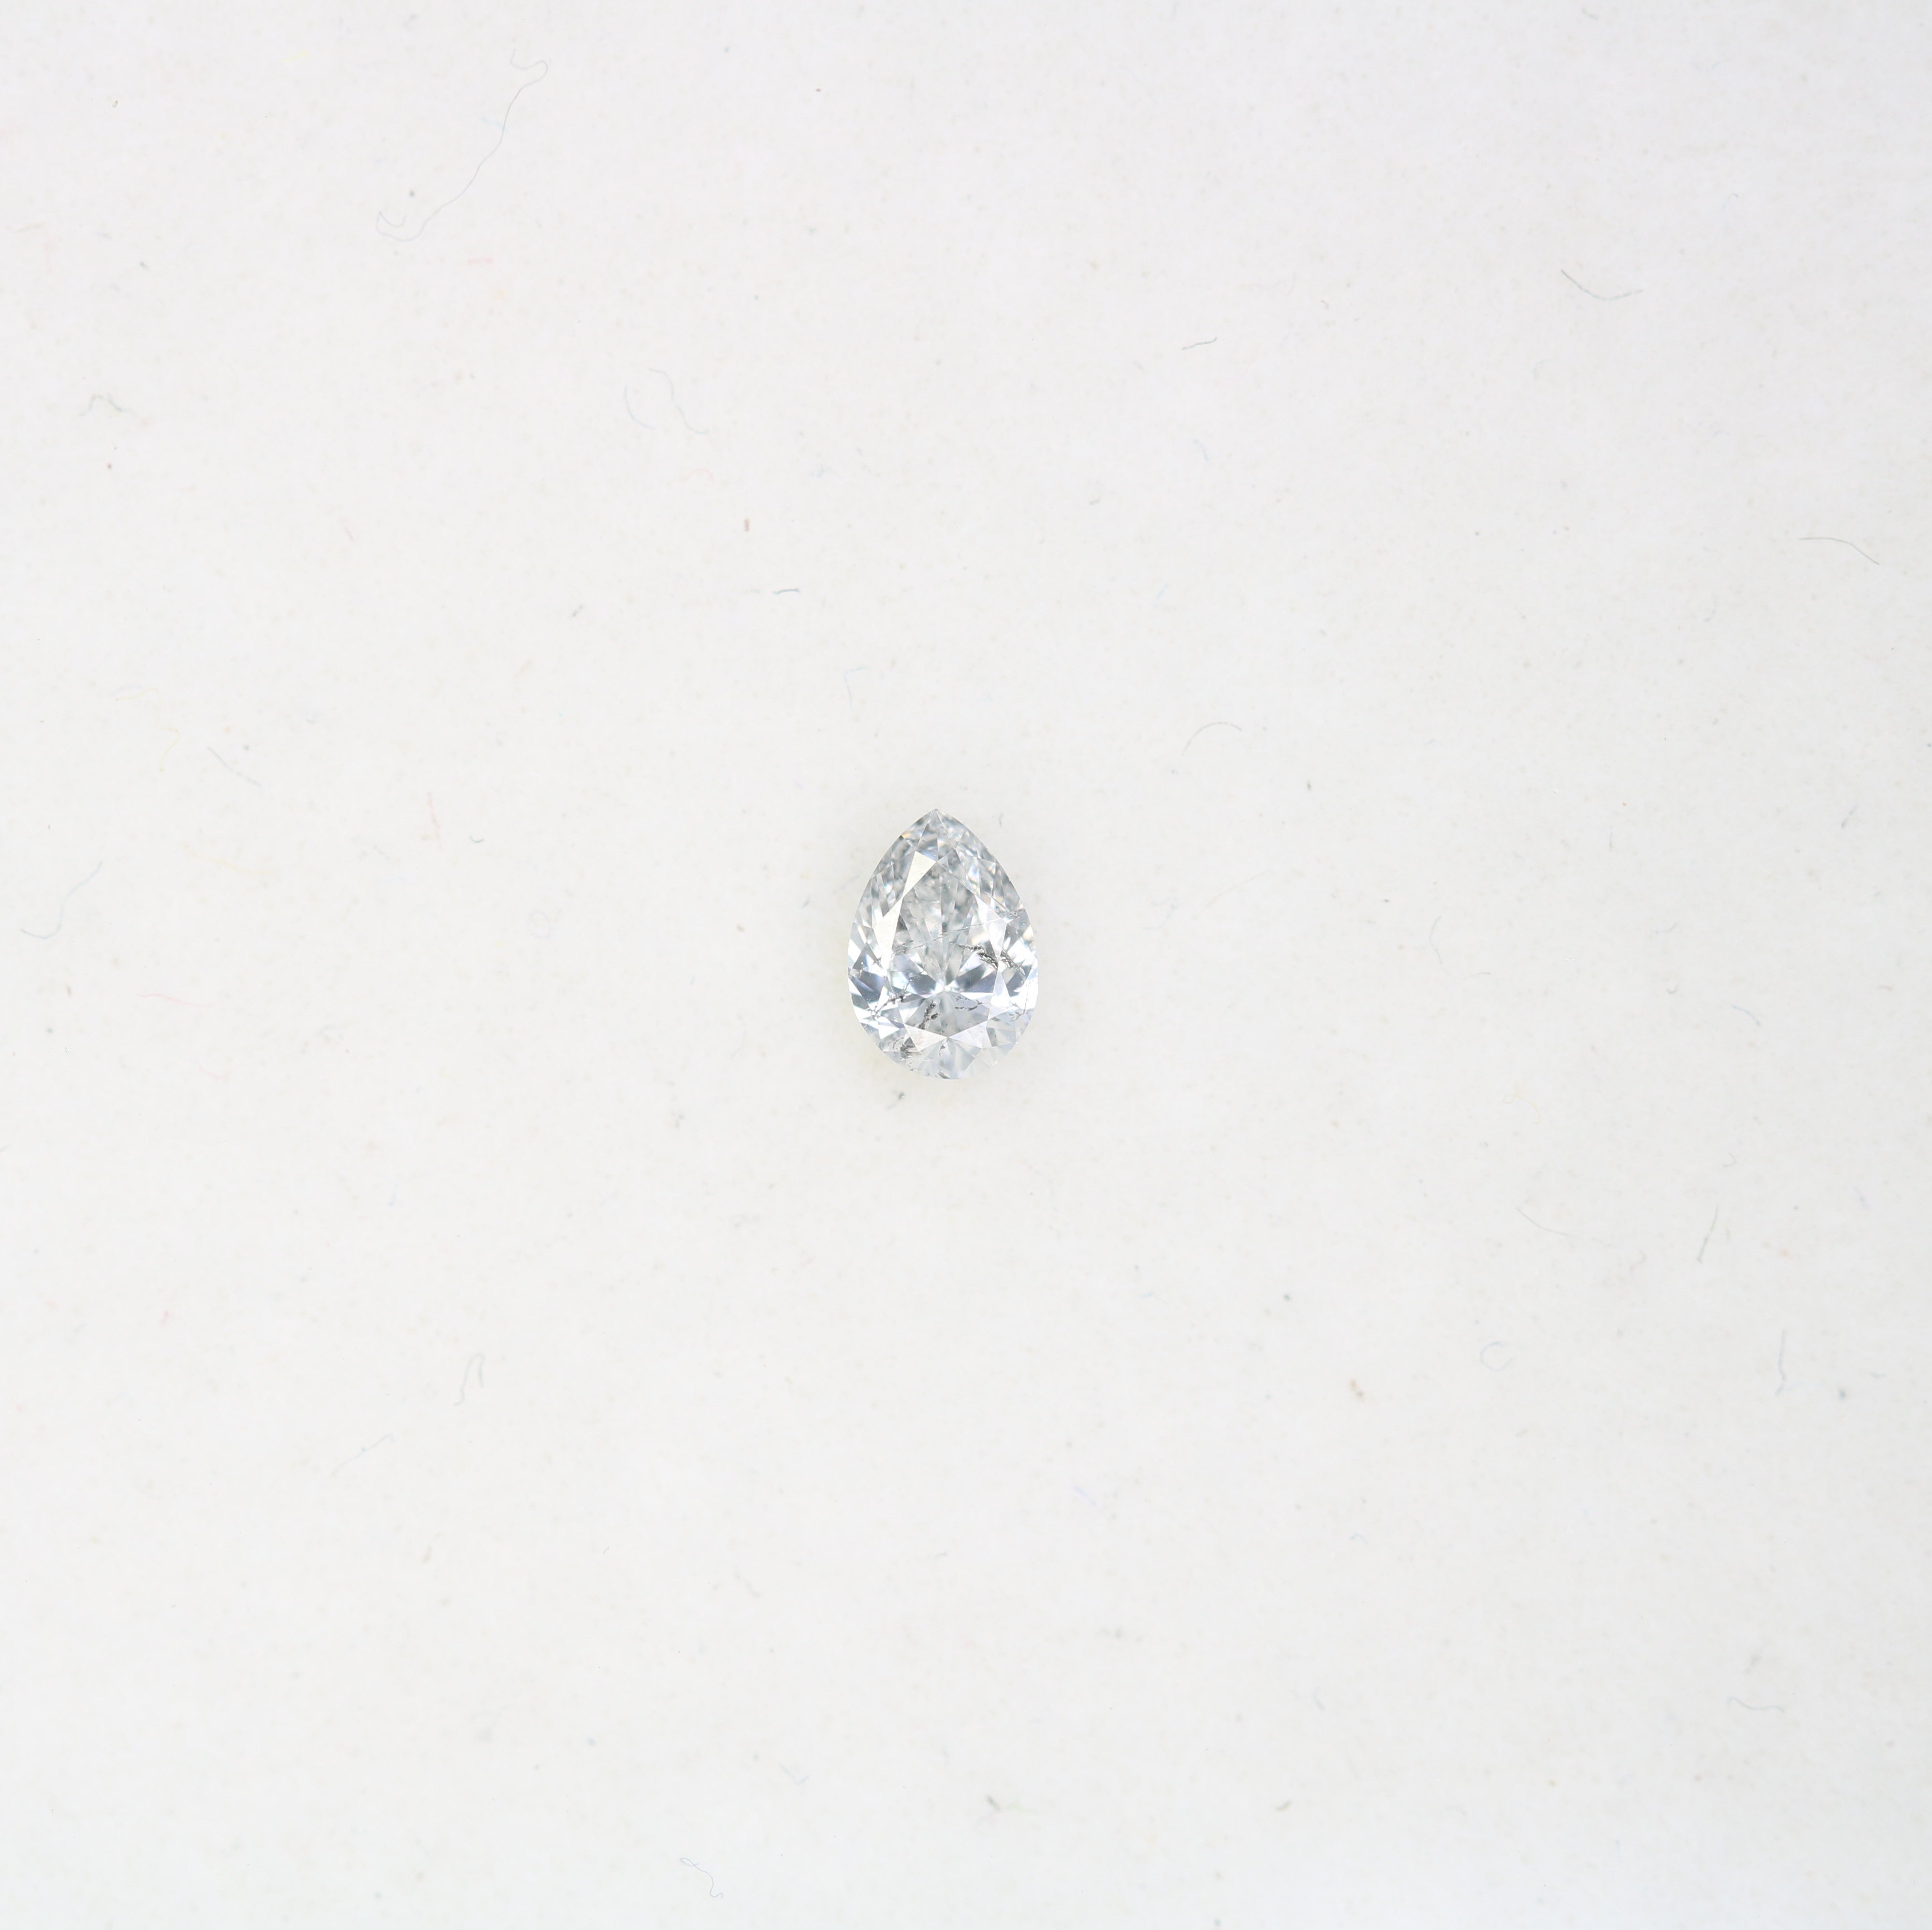 0.17 CT Salt And Pepper Pear Shape Diamond For Engagement Ring